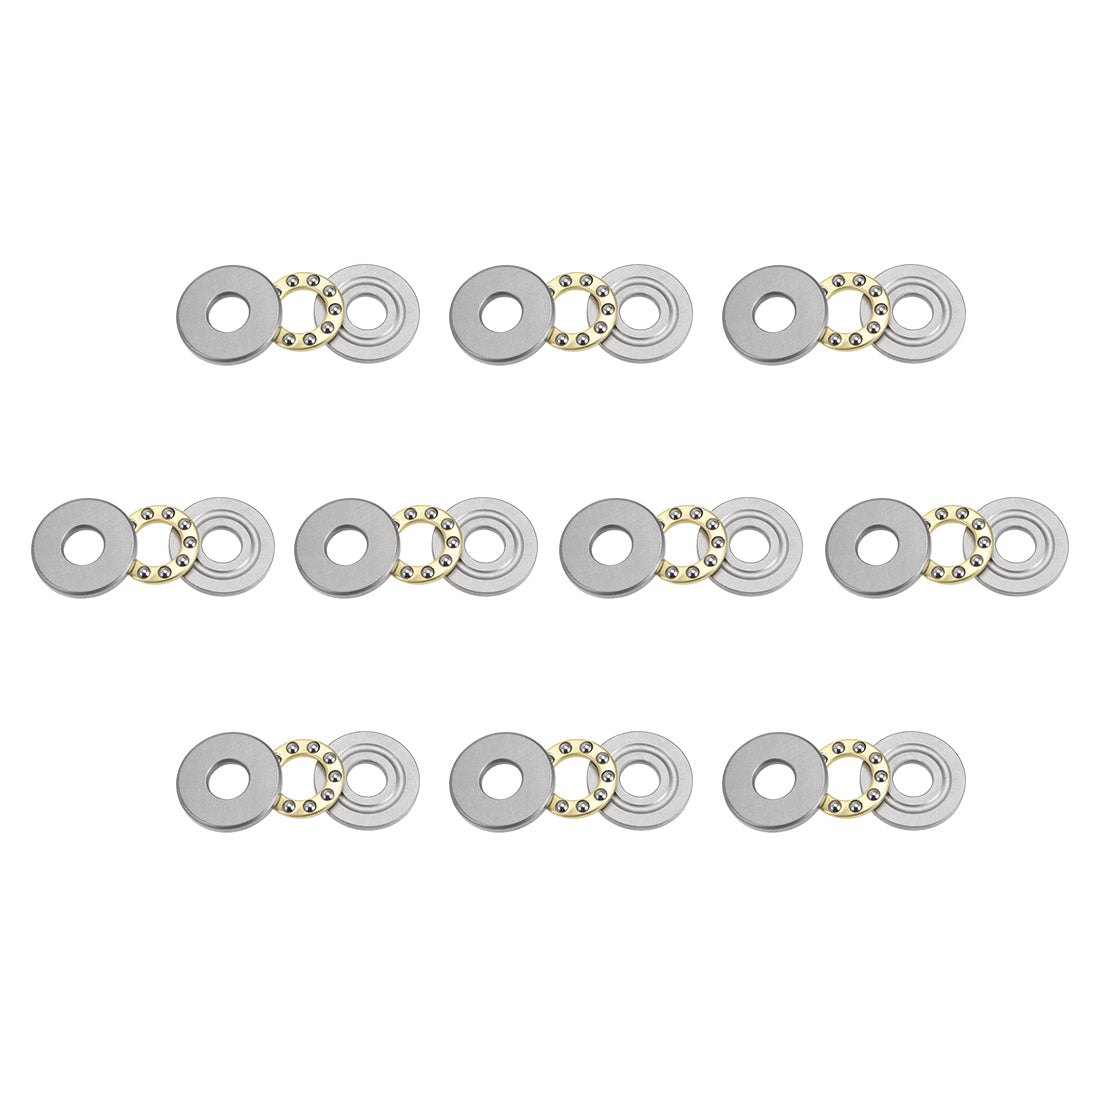 uxcell Uxcell F8-22M Miniature Thrust Ball Bearing 8x22x7mm Chrome Steel with Washer 10Pcs